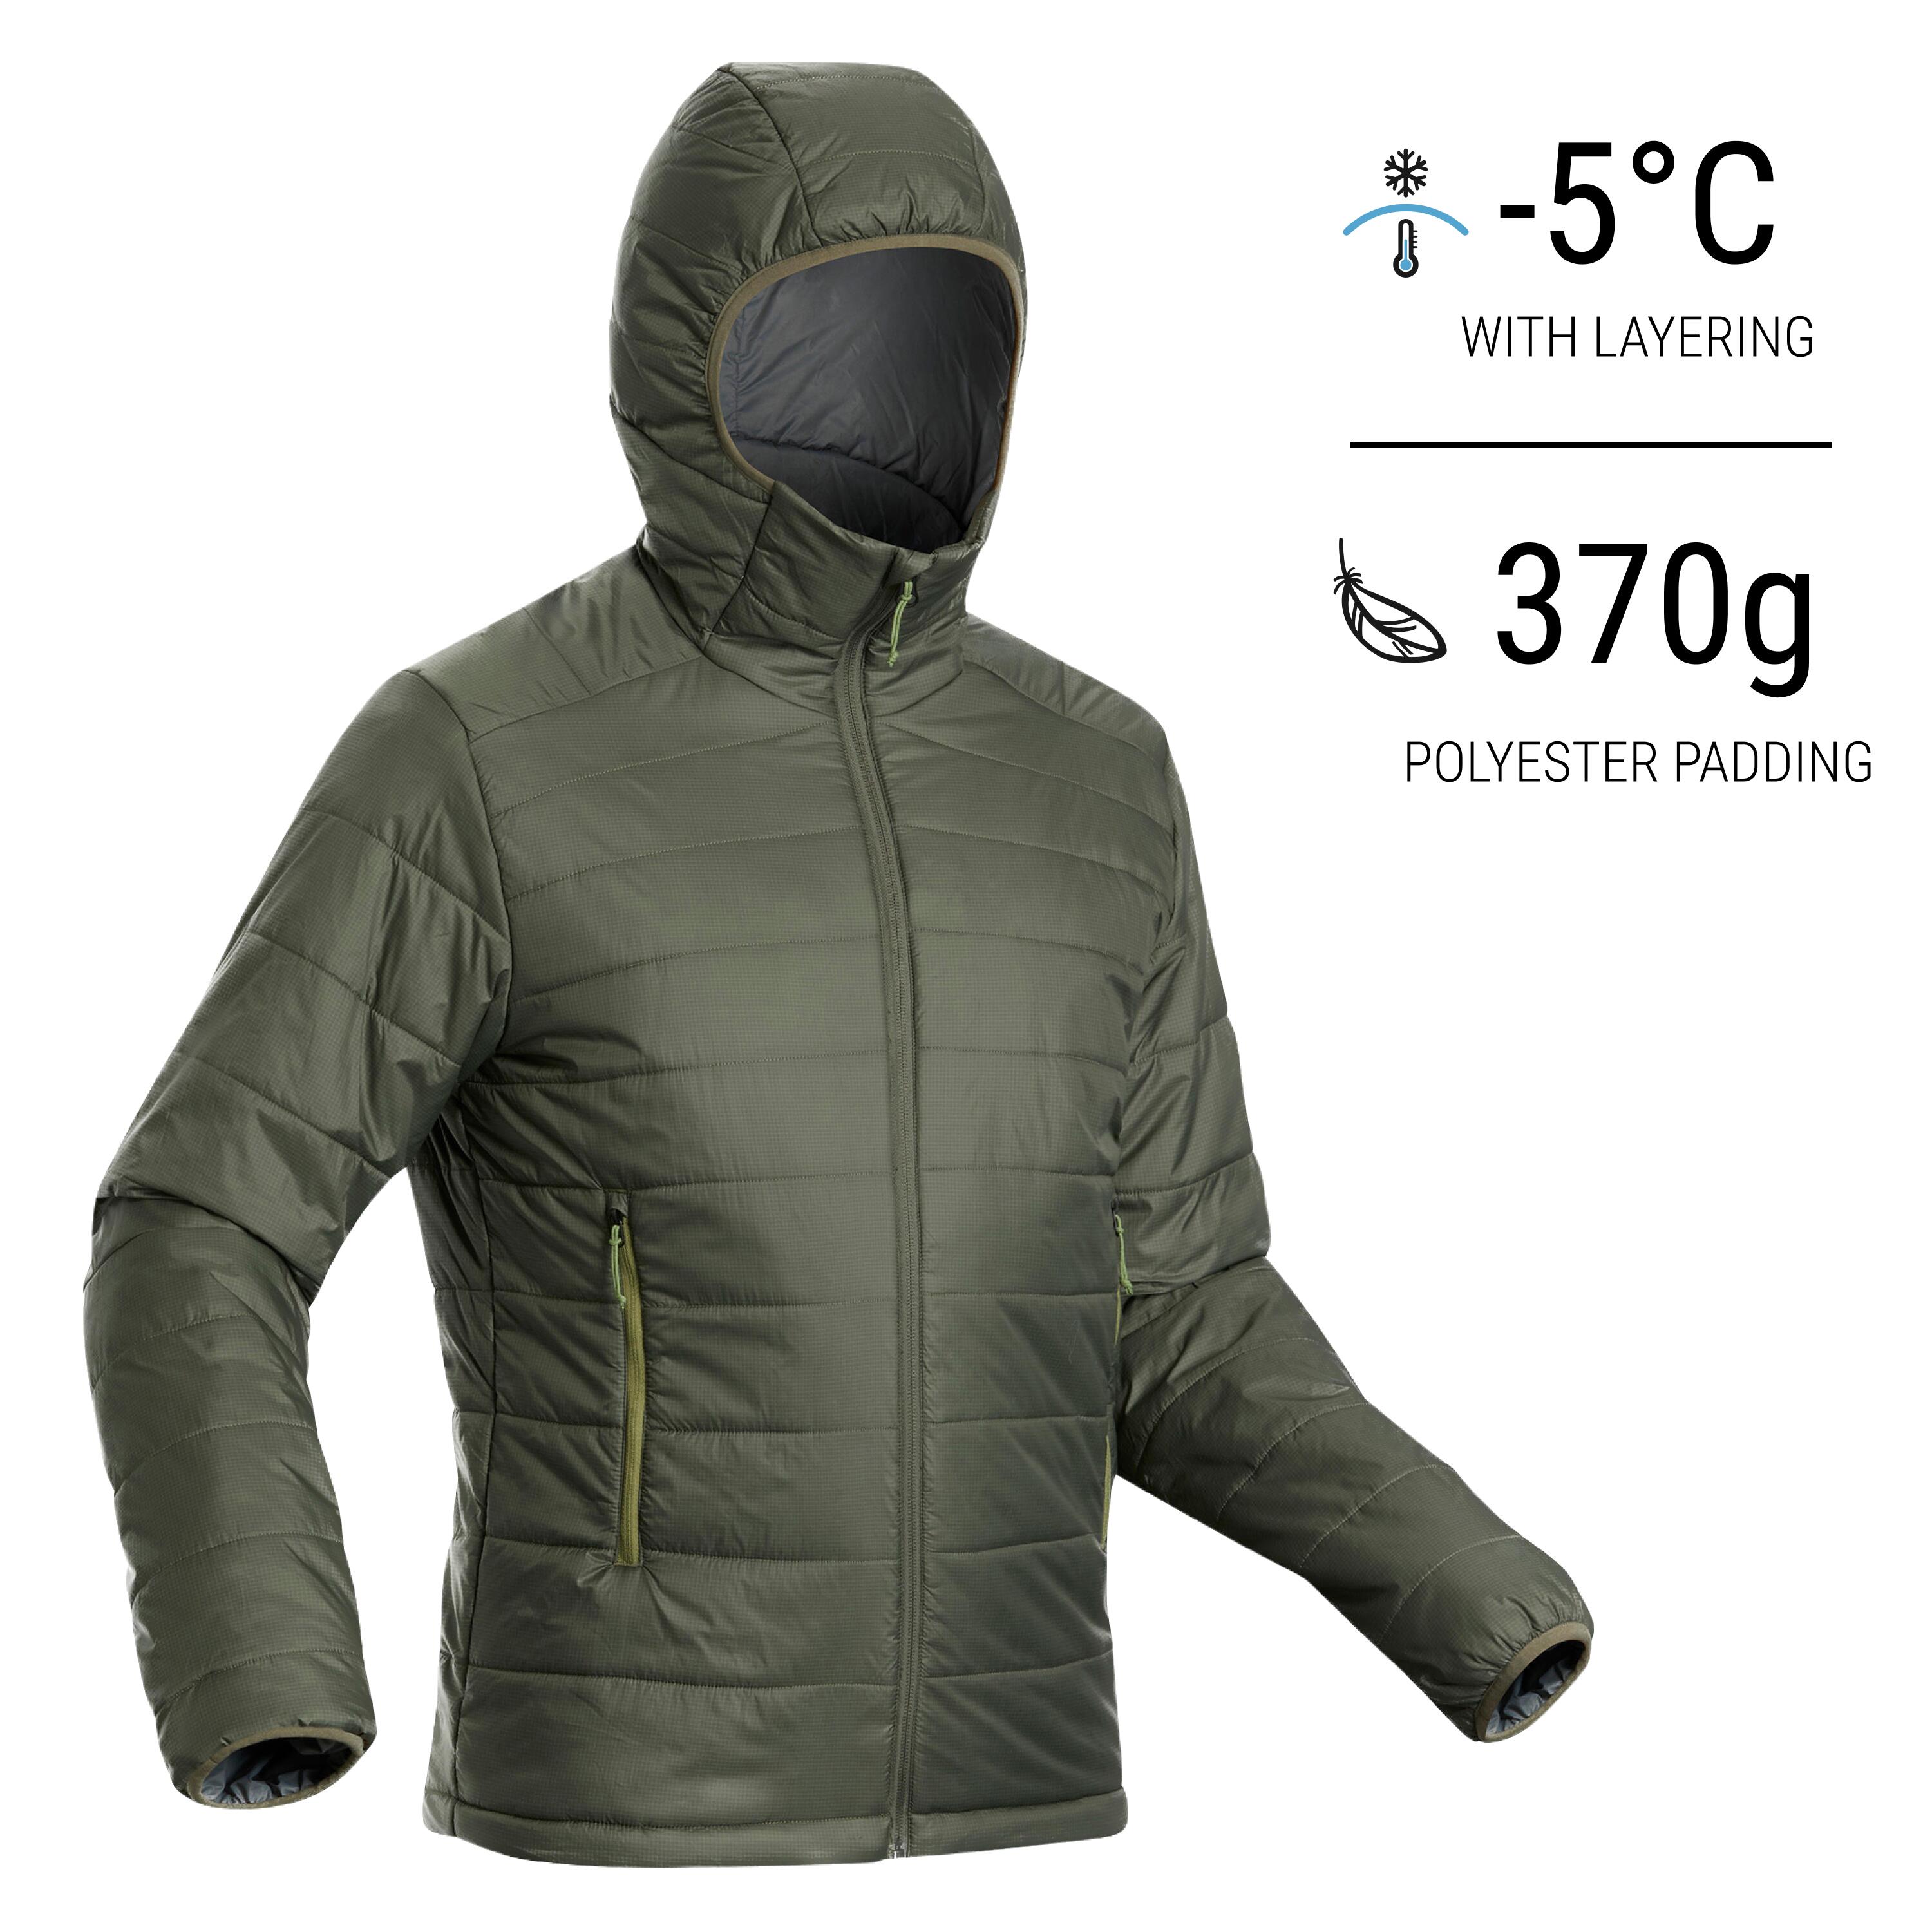 Decathlon Sports India - Atria - The MT100 padded jacket is light and  compact , ideal for city chills and chilly hills! You can trek comfortably  in cool weather down to -5